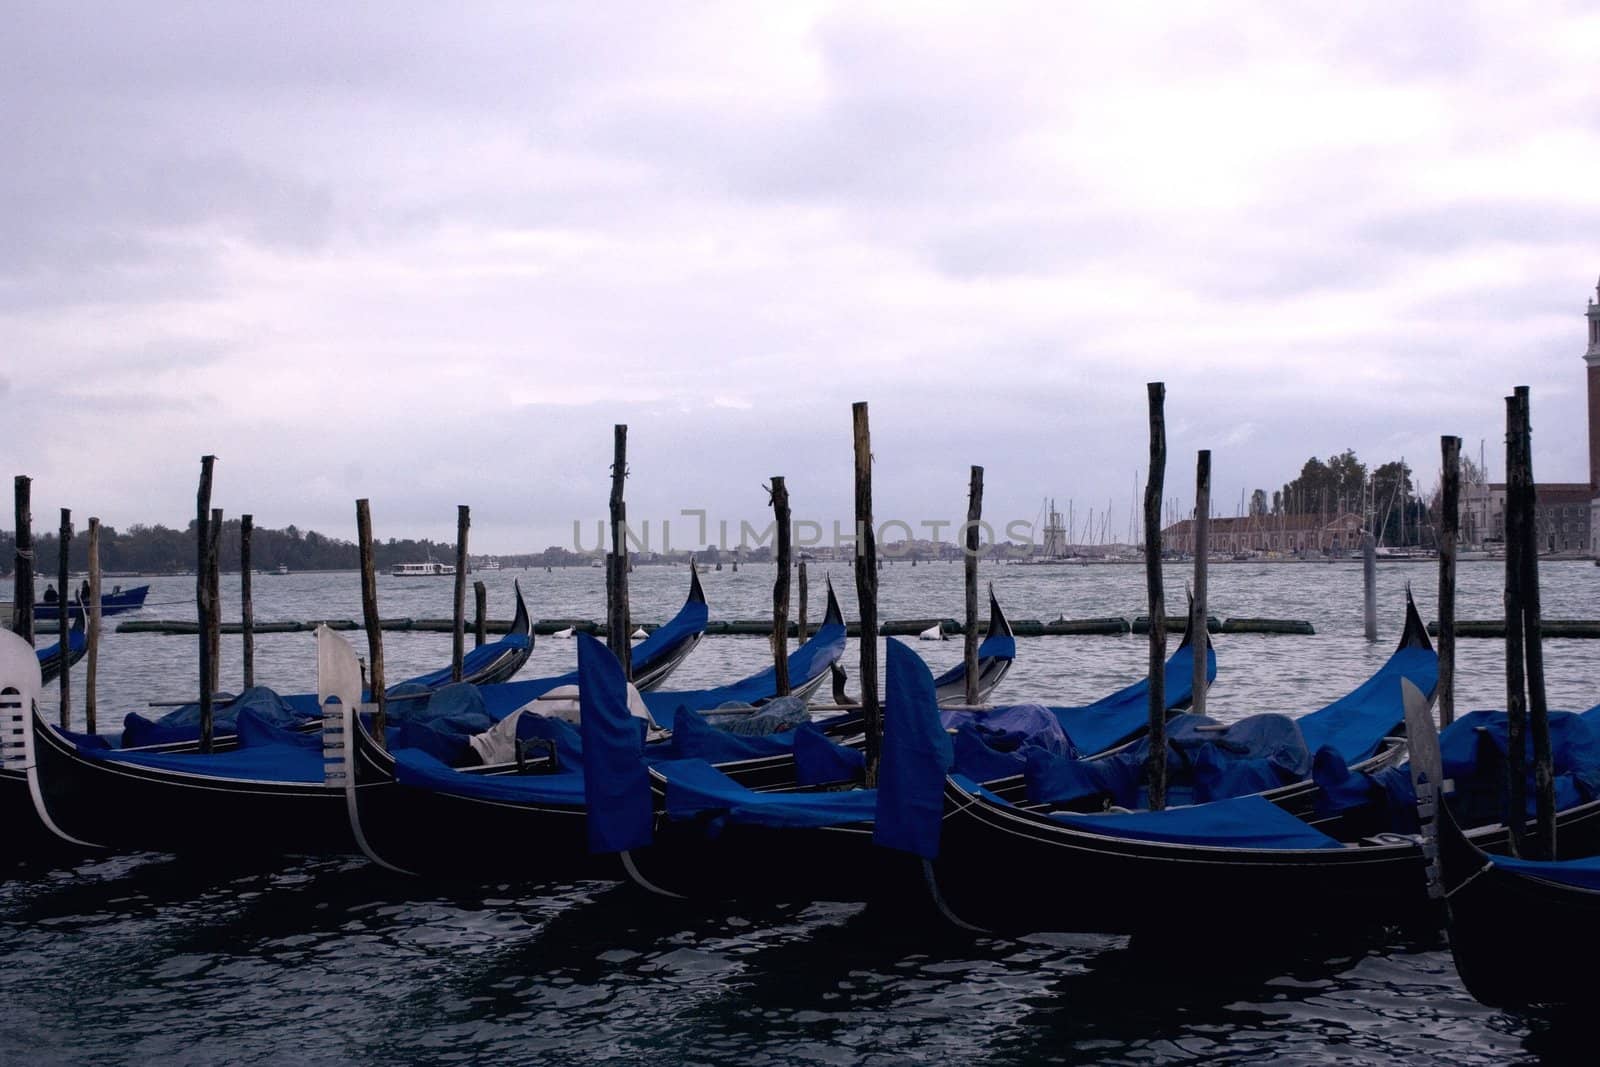 Several gondolas being parked by janza